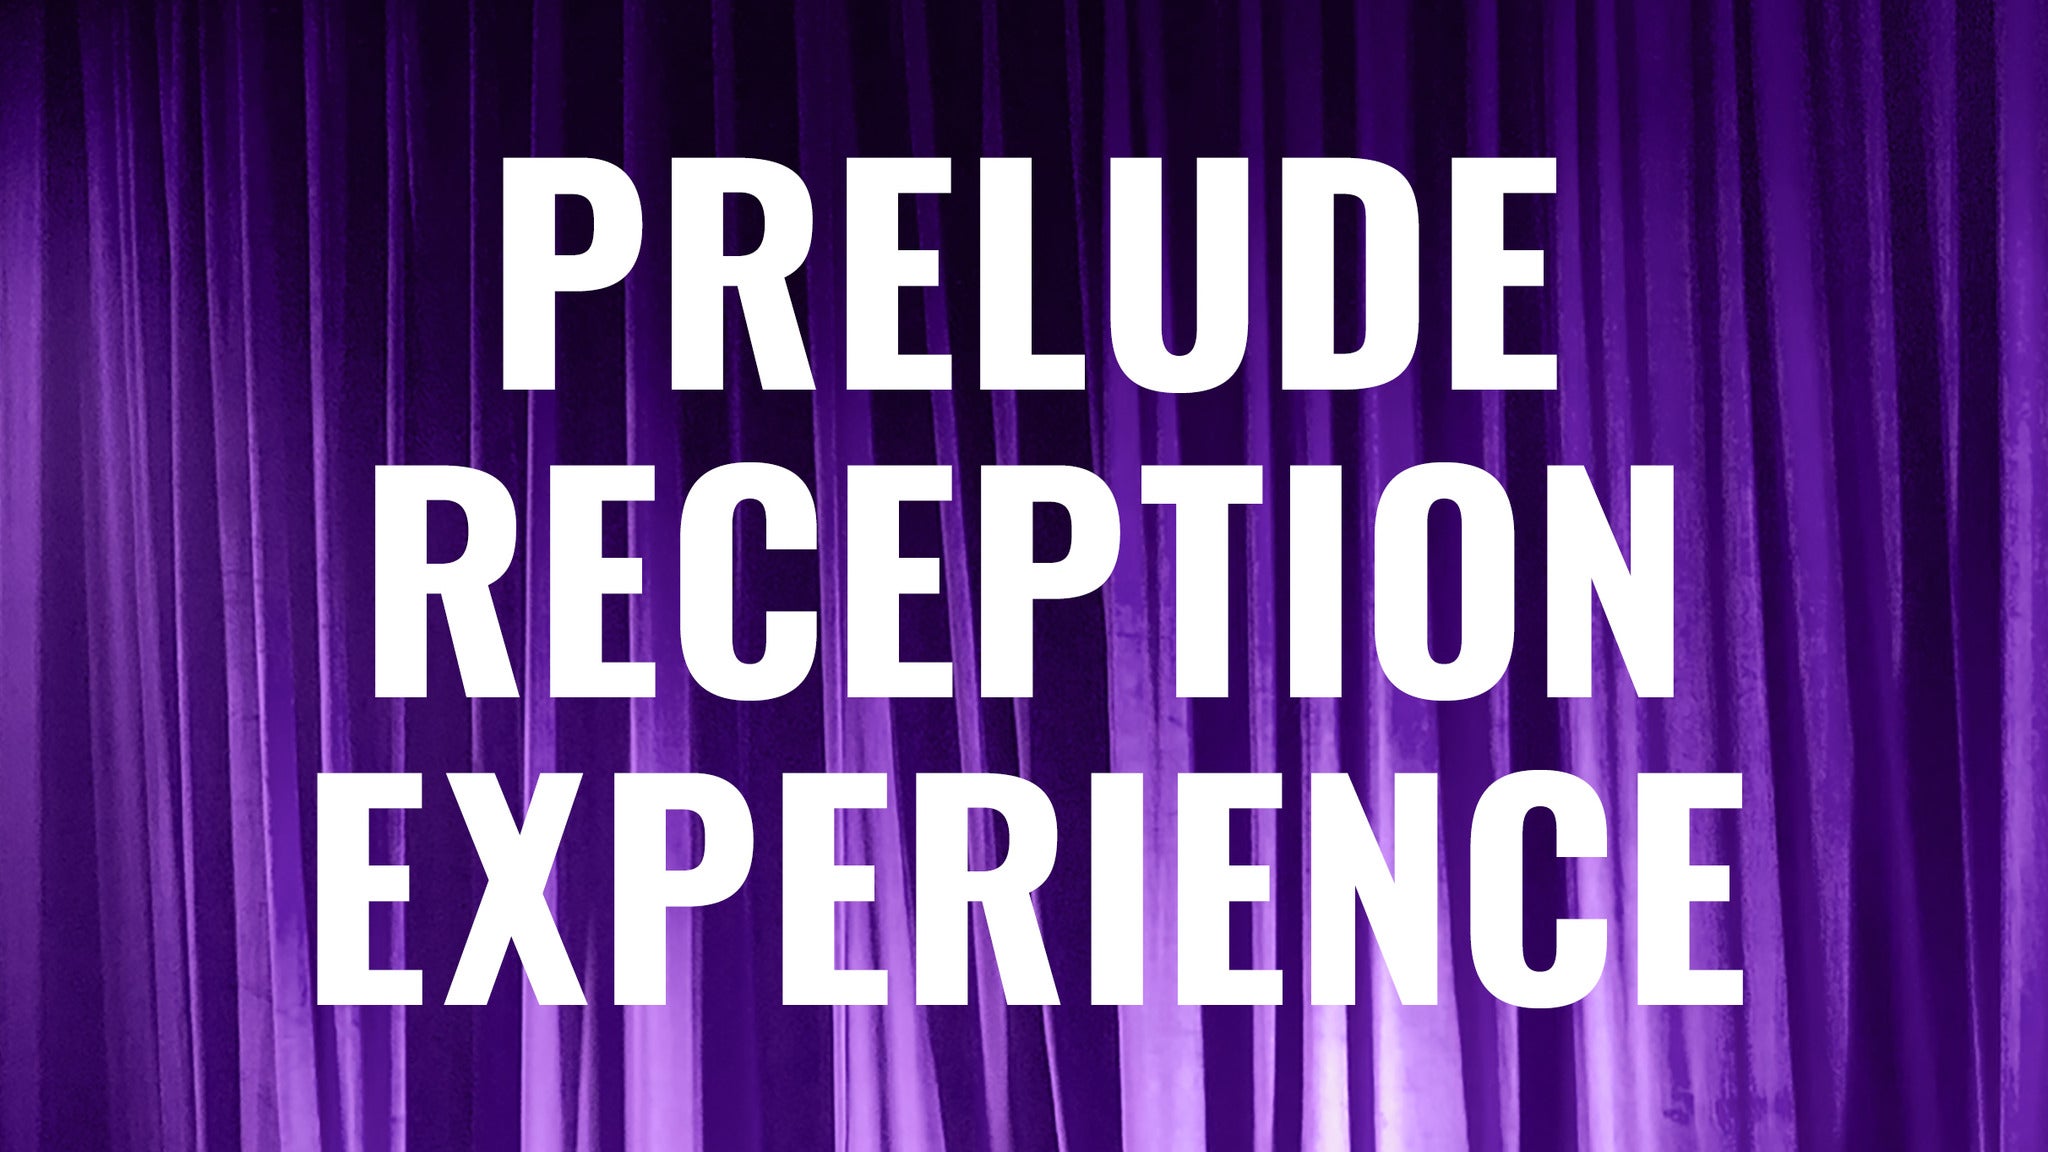 Prelude Reception Experience at the Tanger Center presale information on freepresalepasswords.com